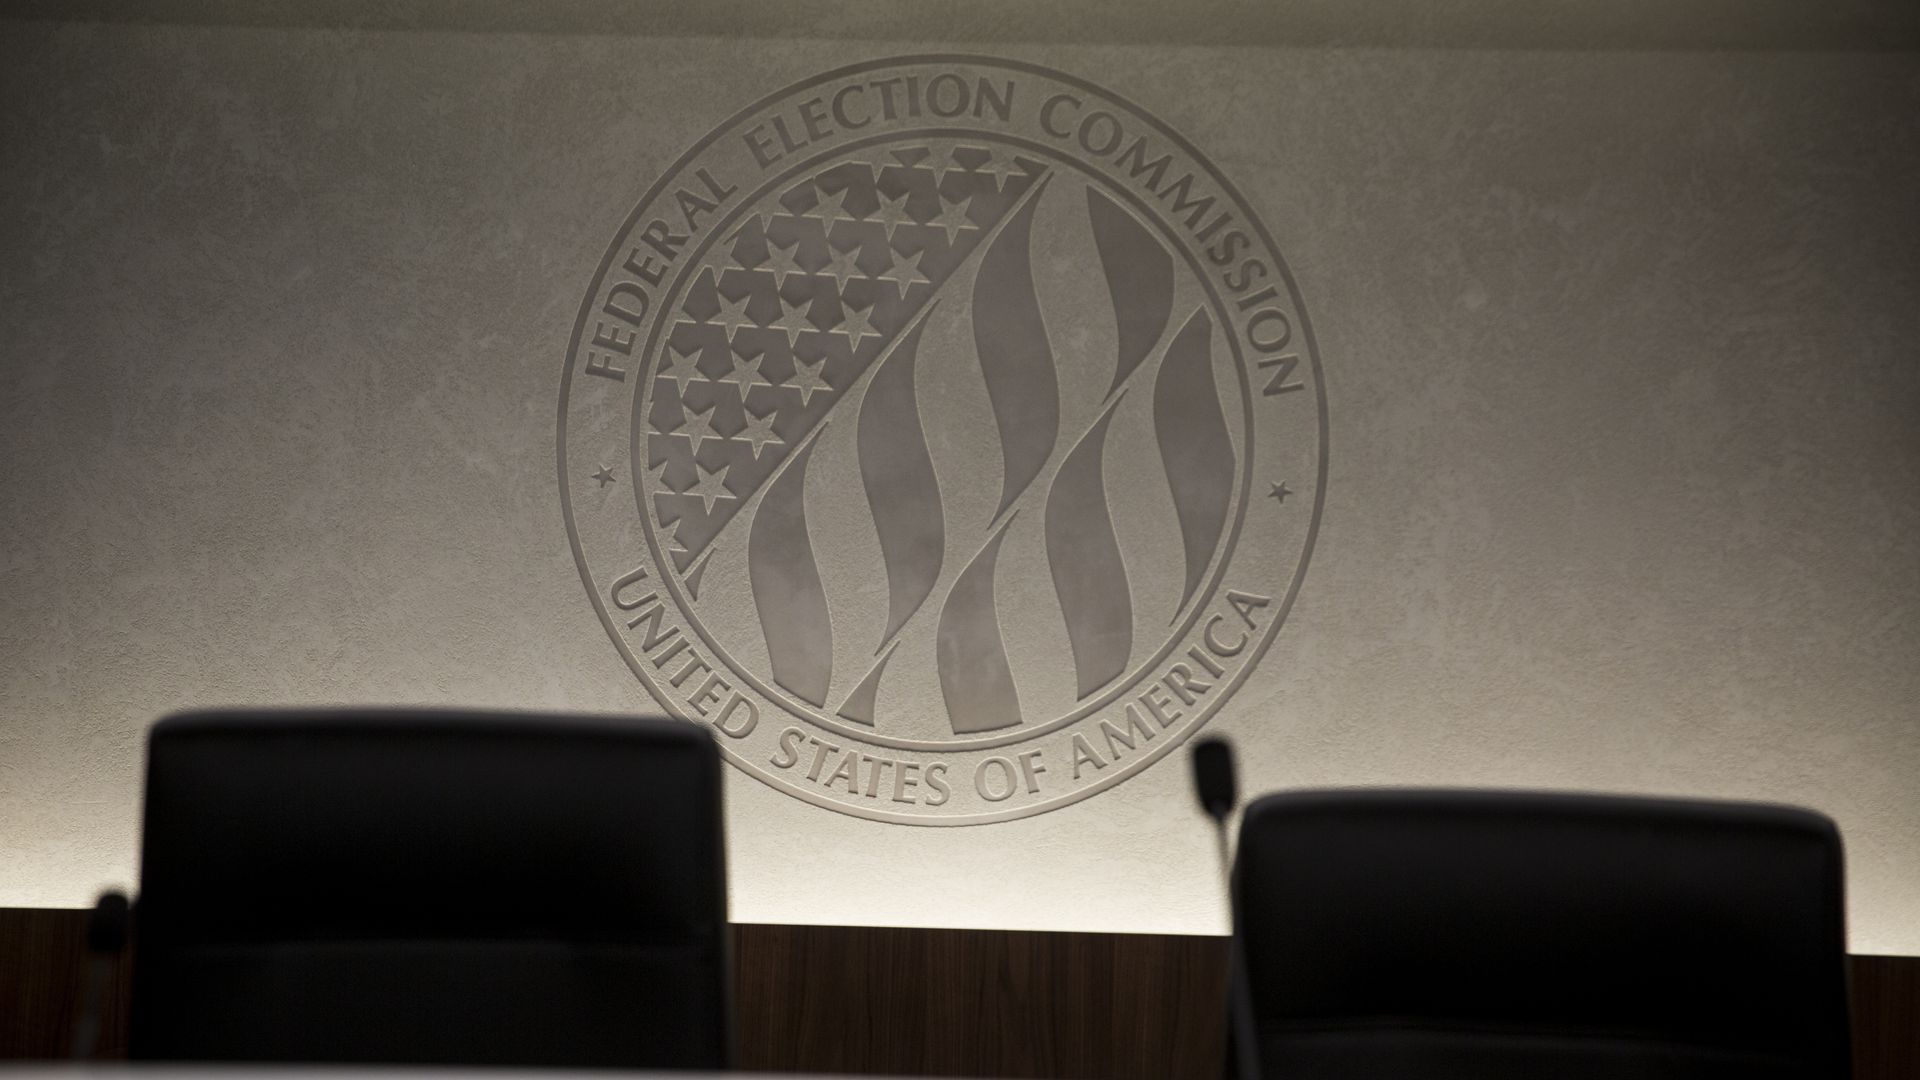 The federal election commission logo behind a set of empty chairs.